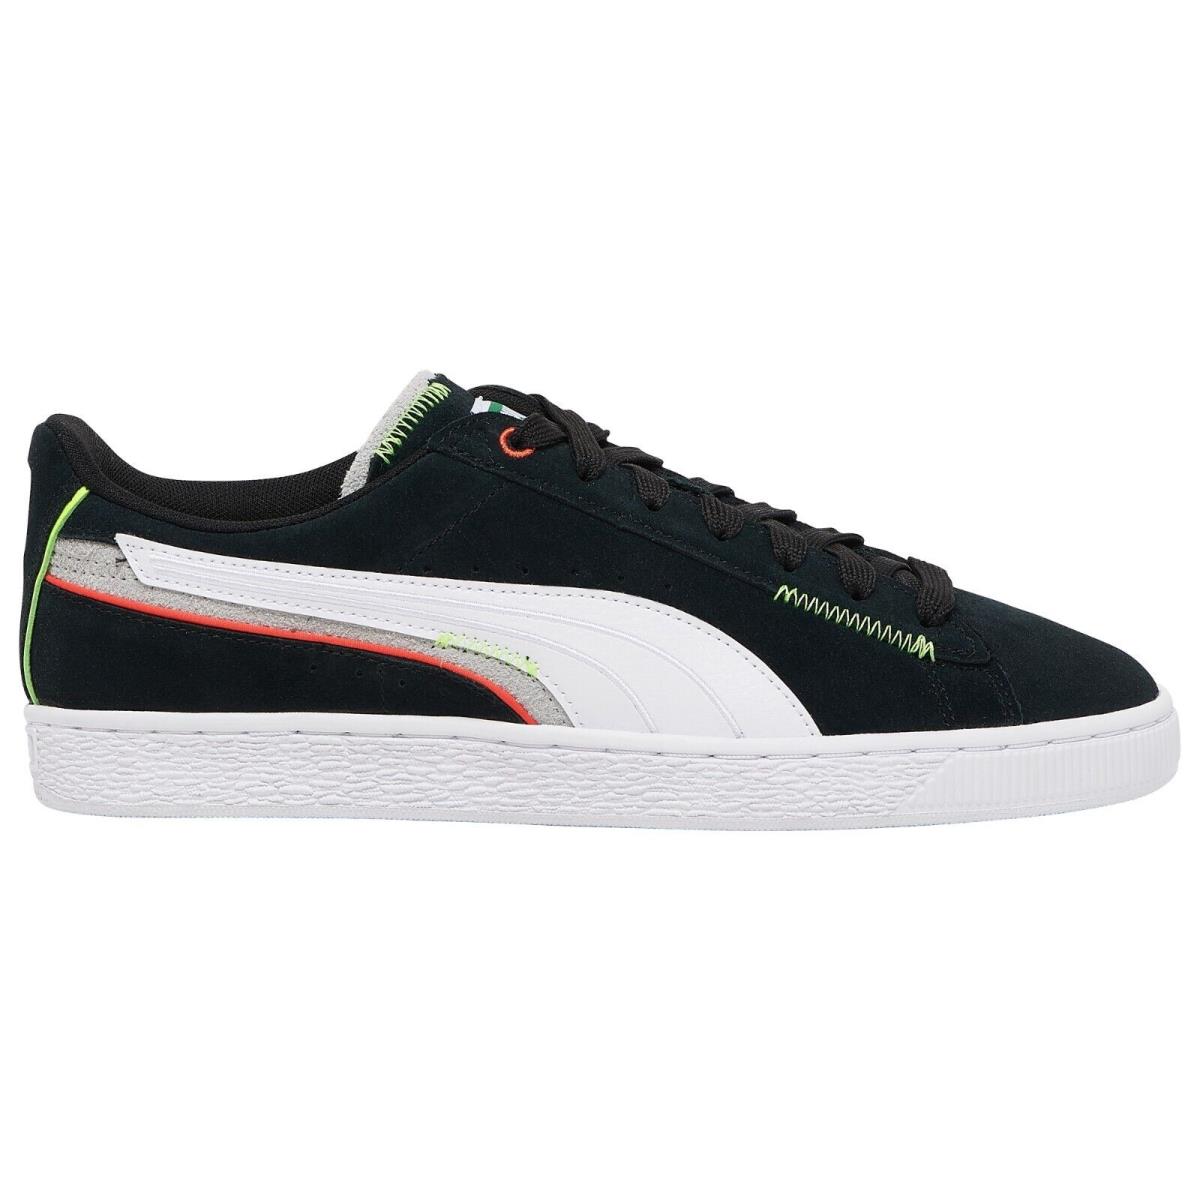 Puma Men`s Classic Breathable Premium Suede Lightweight Rubber Outsole Shoes Black/White/Red